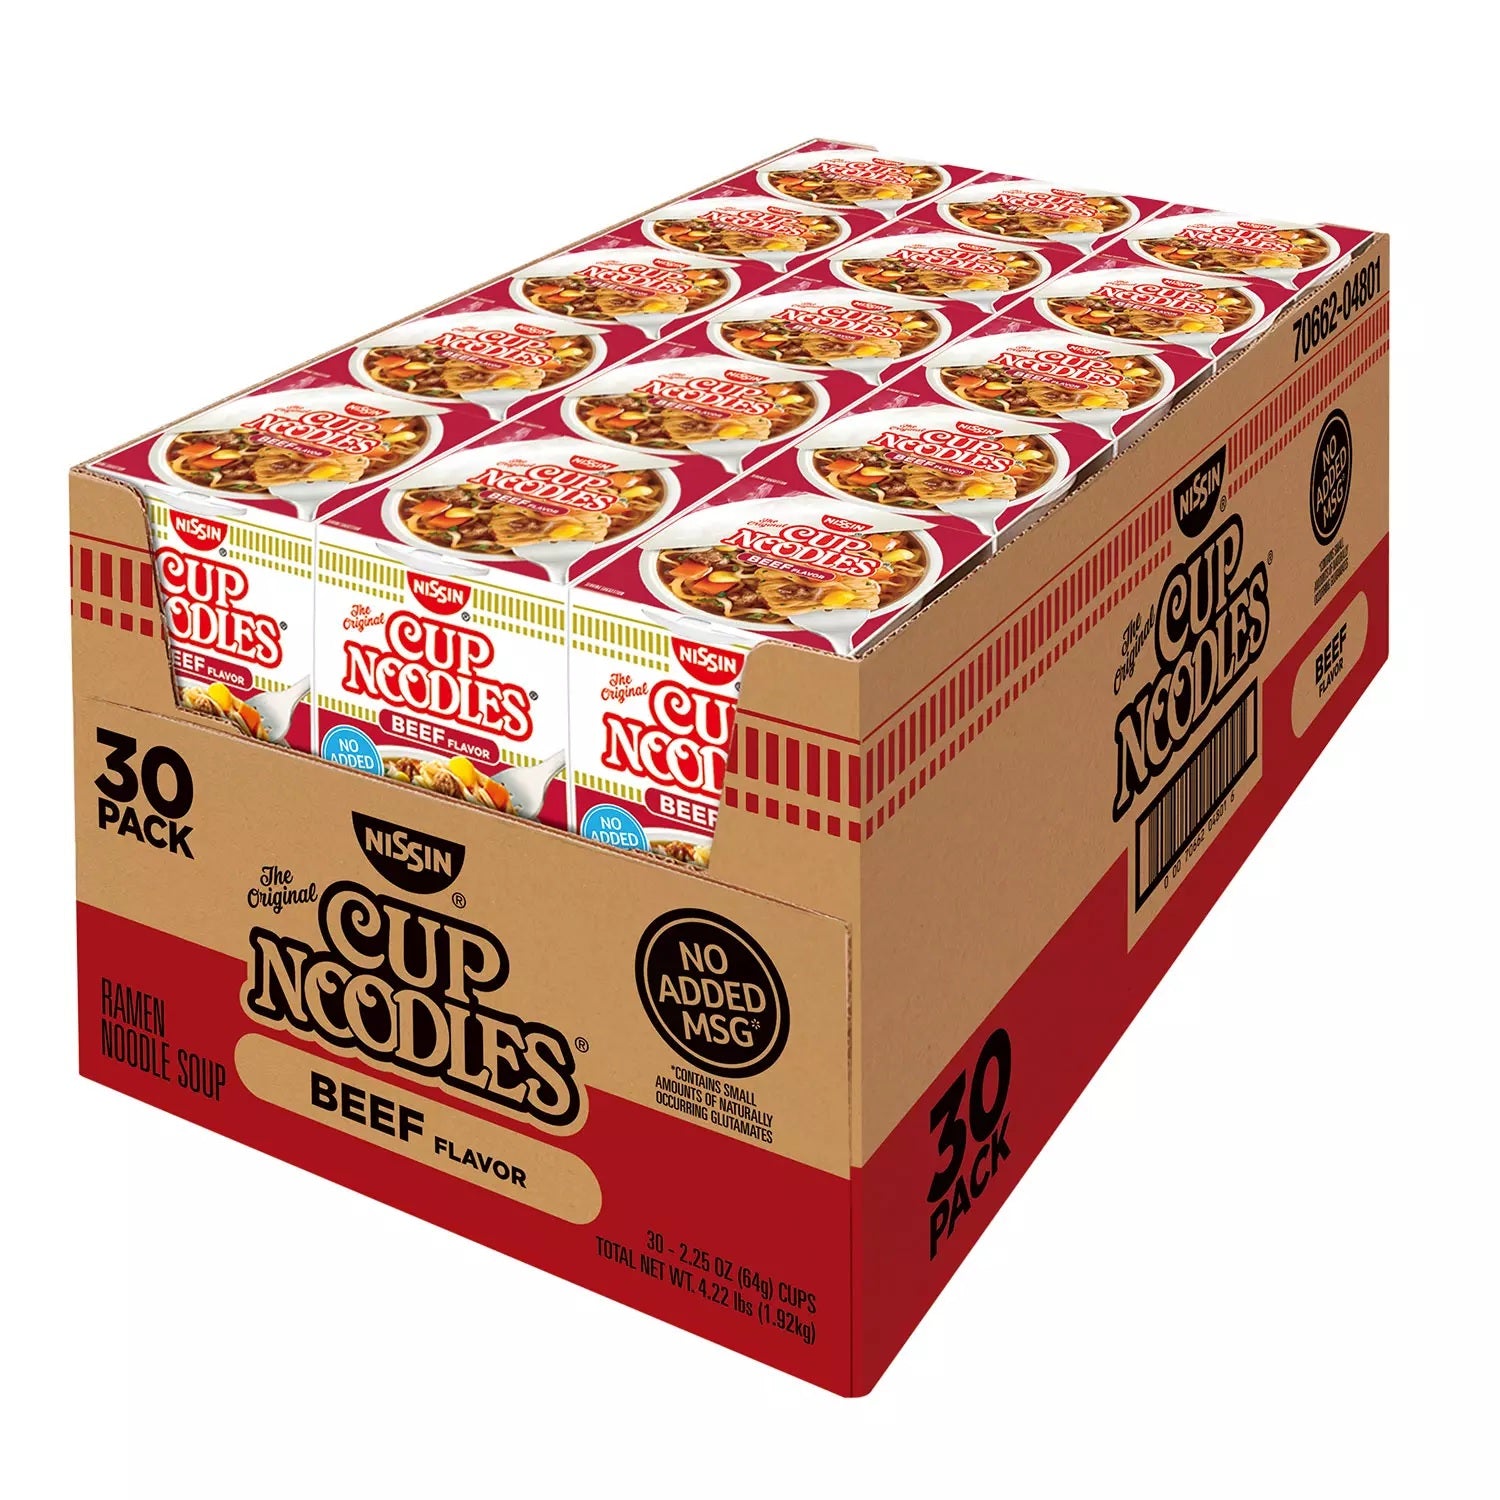 Nissin Cup Noodles with Beef - 2.25oz/24pk